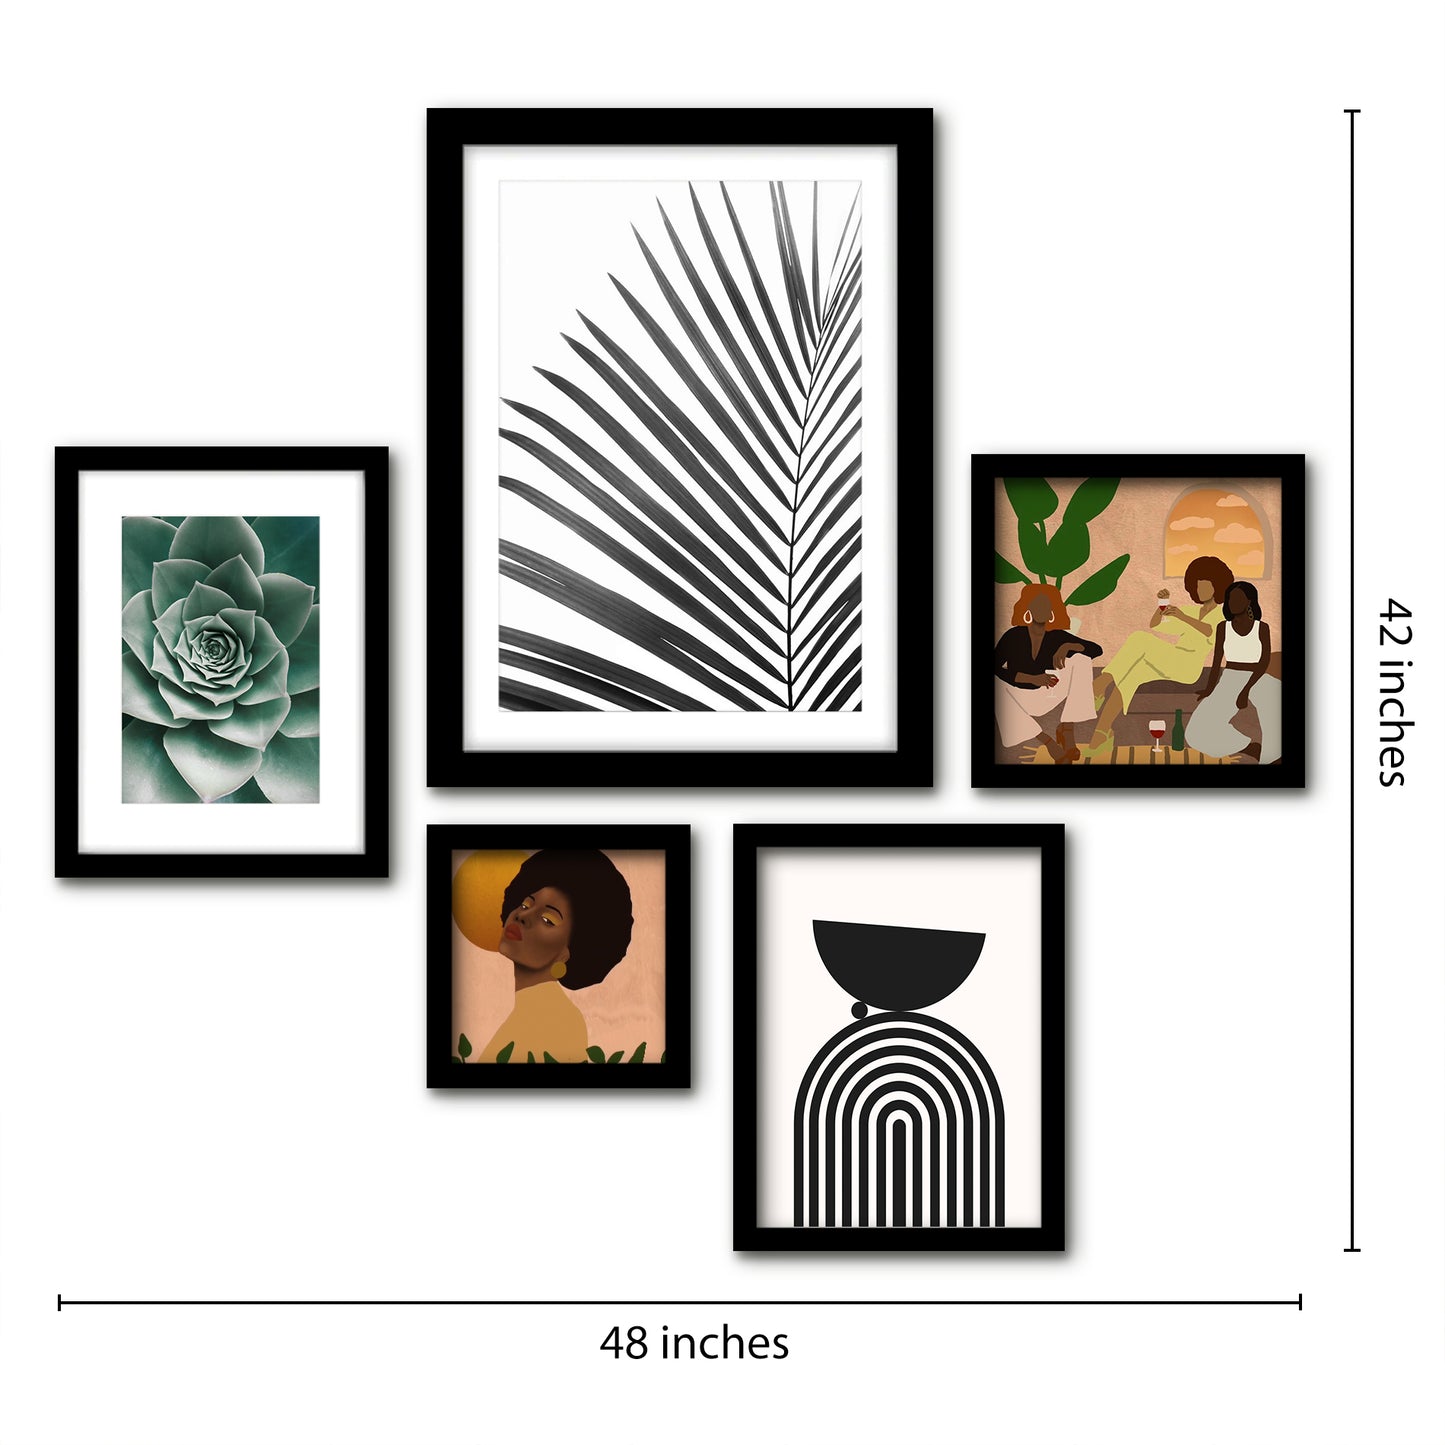 Americanflat 5 Piece Black Framed Gallery Wall Art Set - Female Floral Shapes